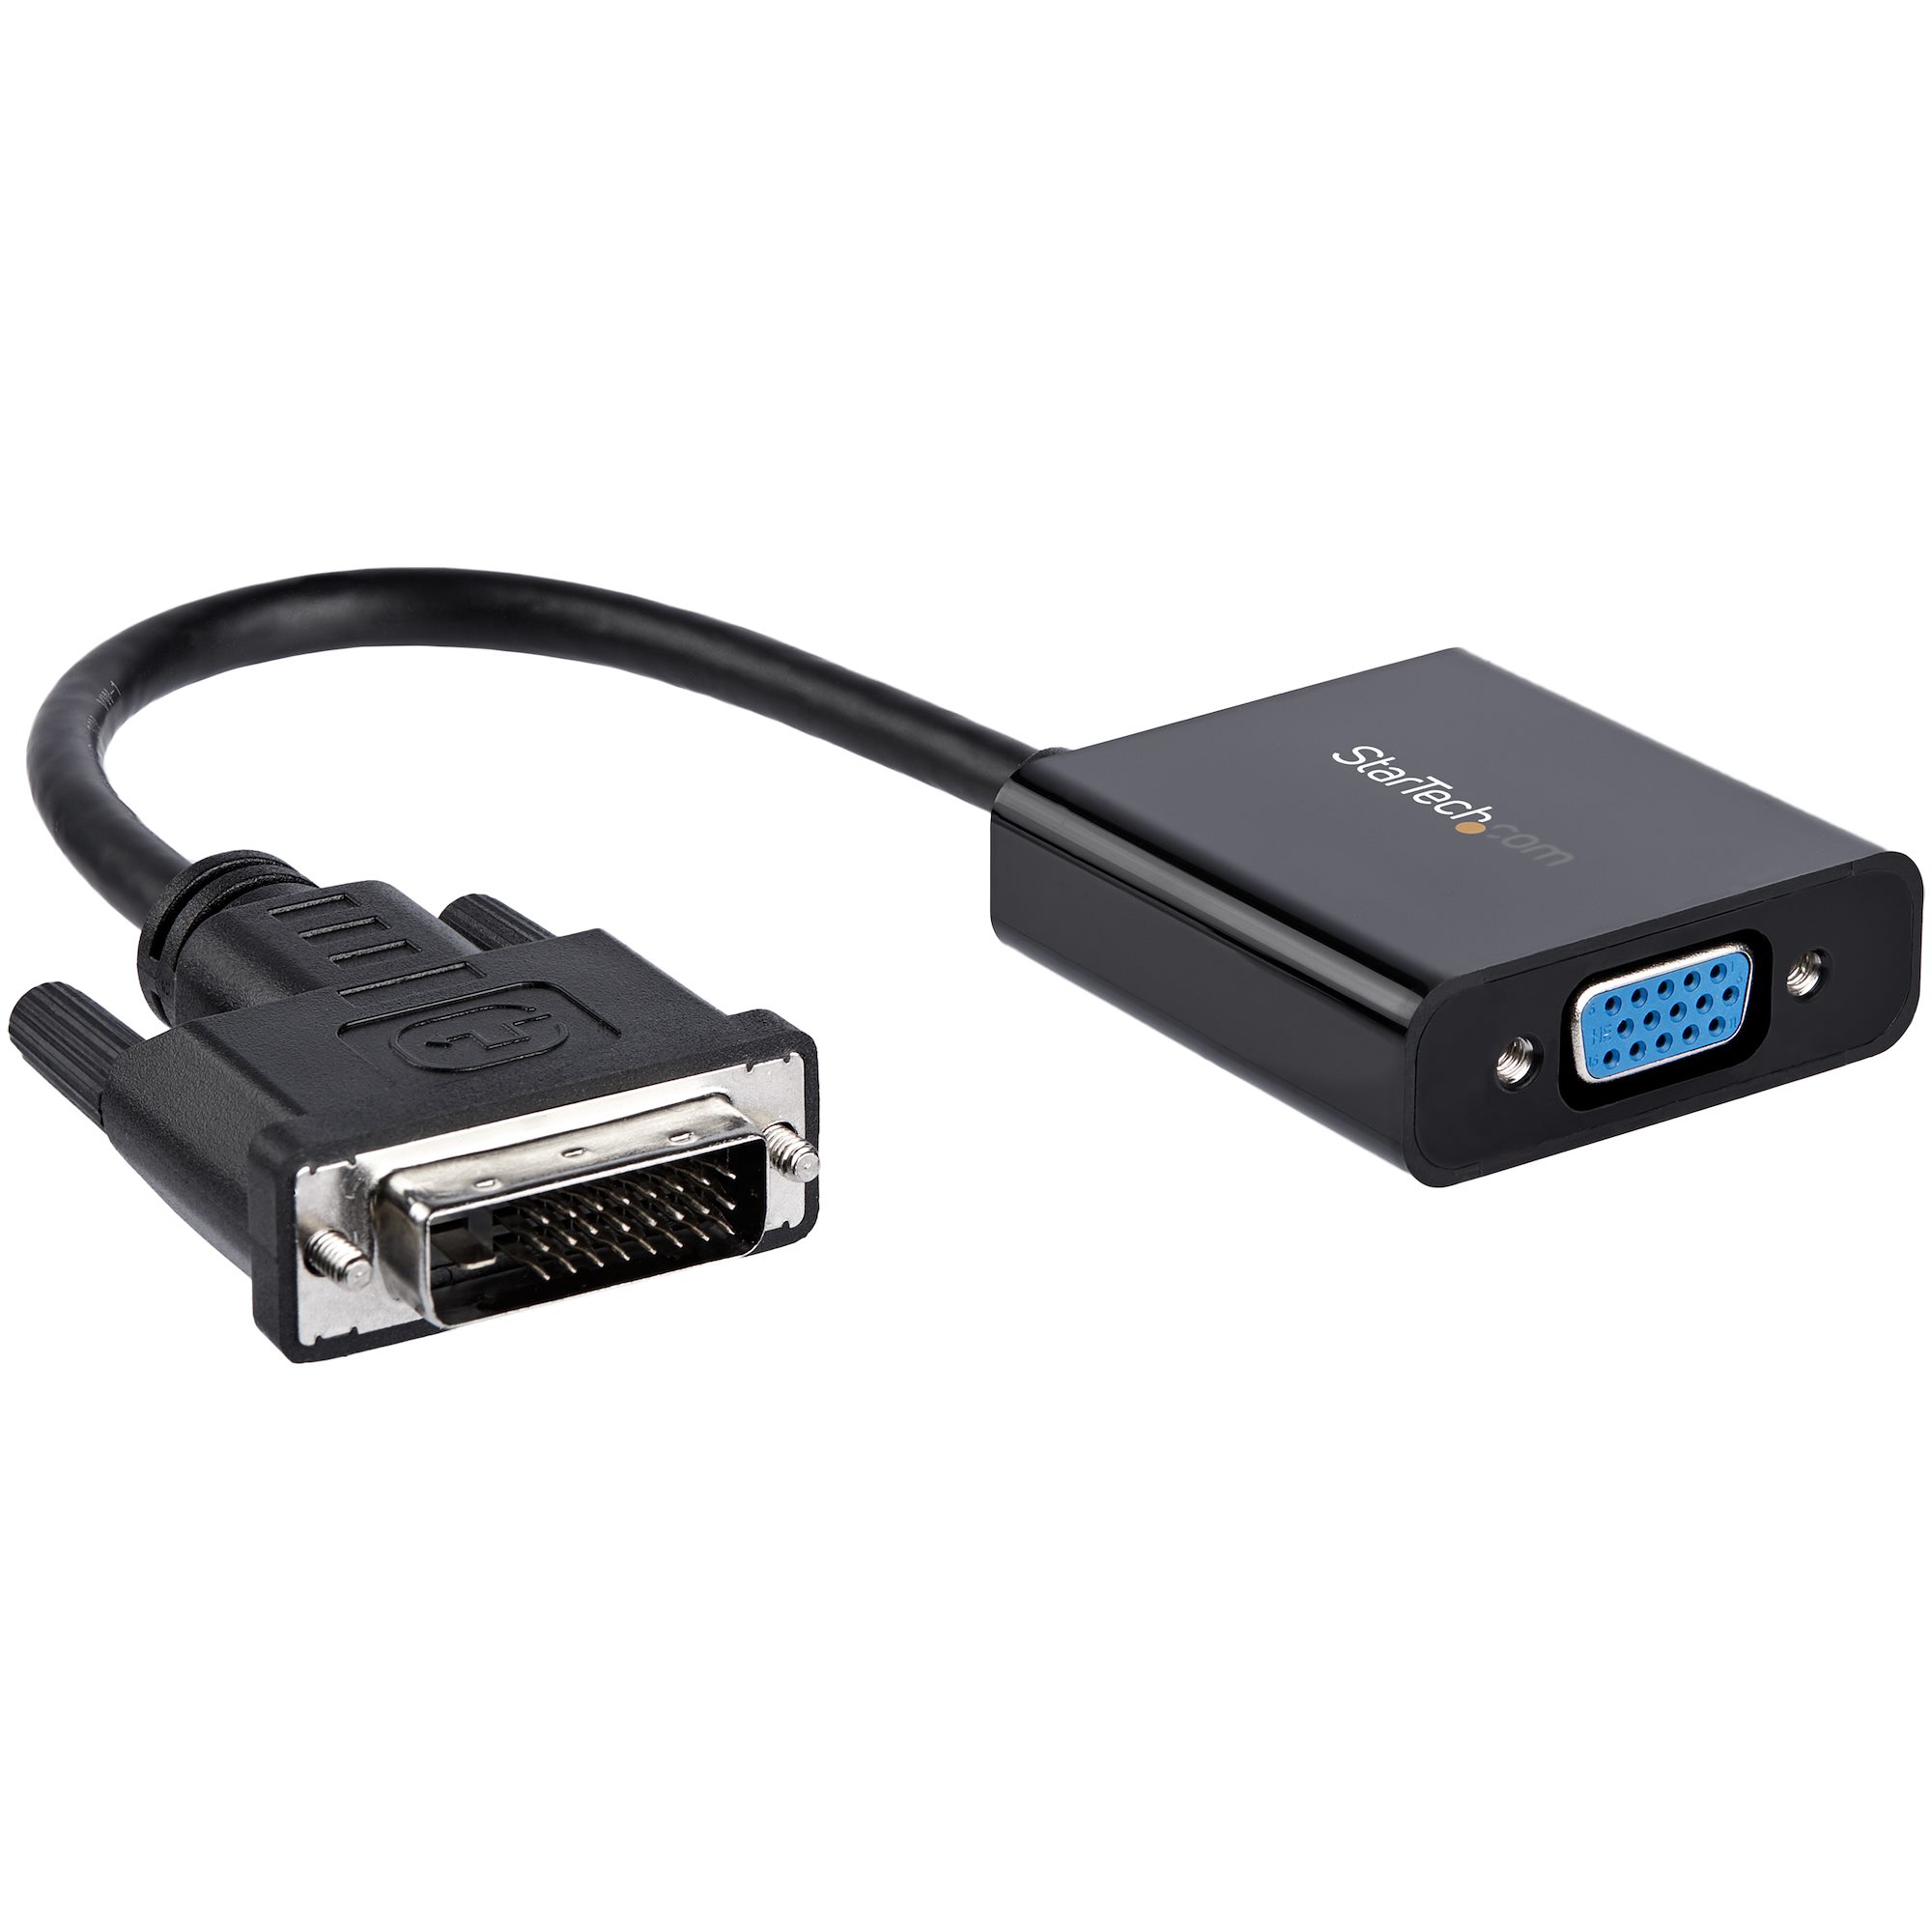 Bother waitress Havoc DVI-D to VGA Adapter - Active - HDMI® and DVI Video Adapters | StarTech.com